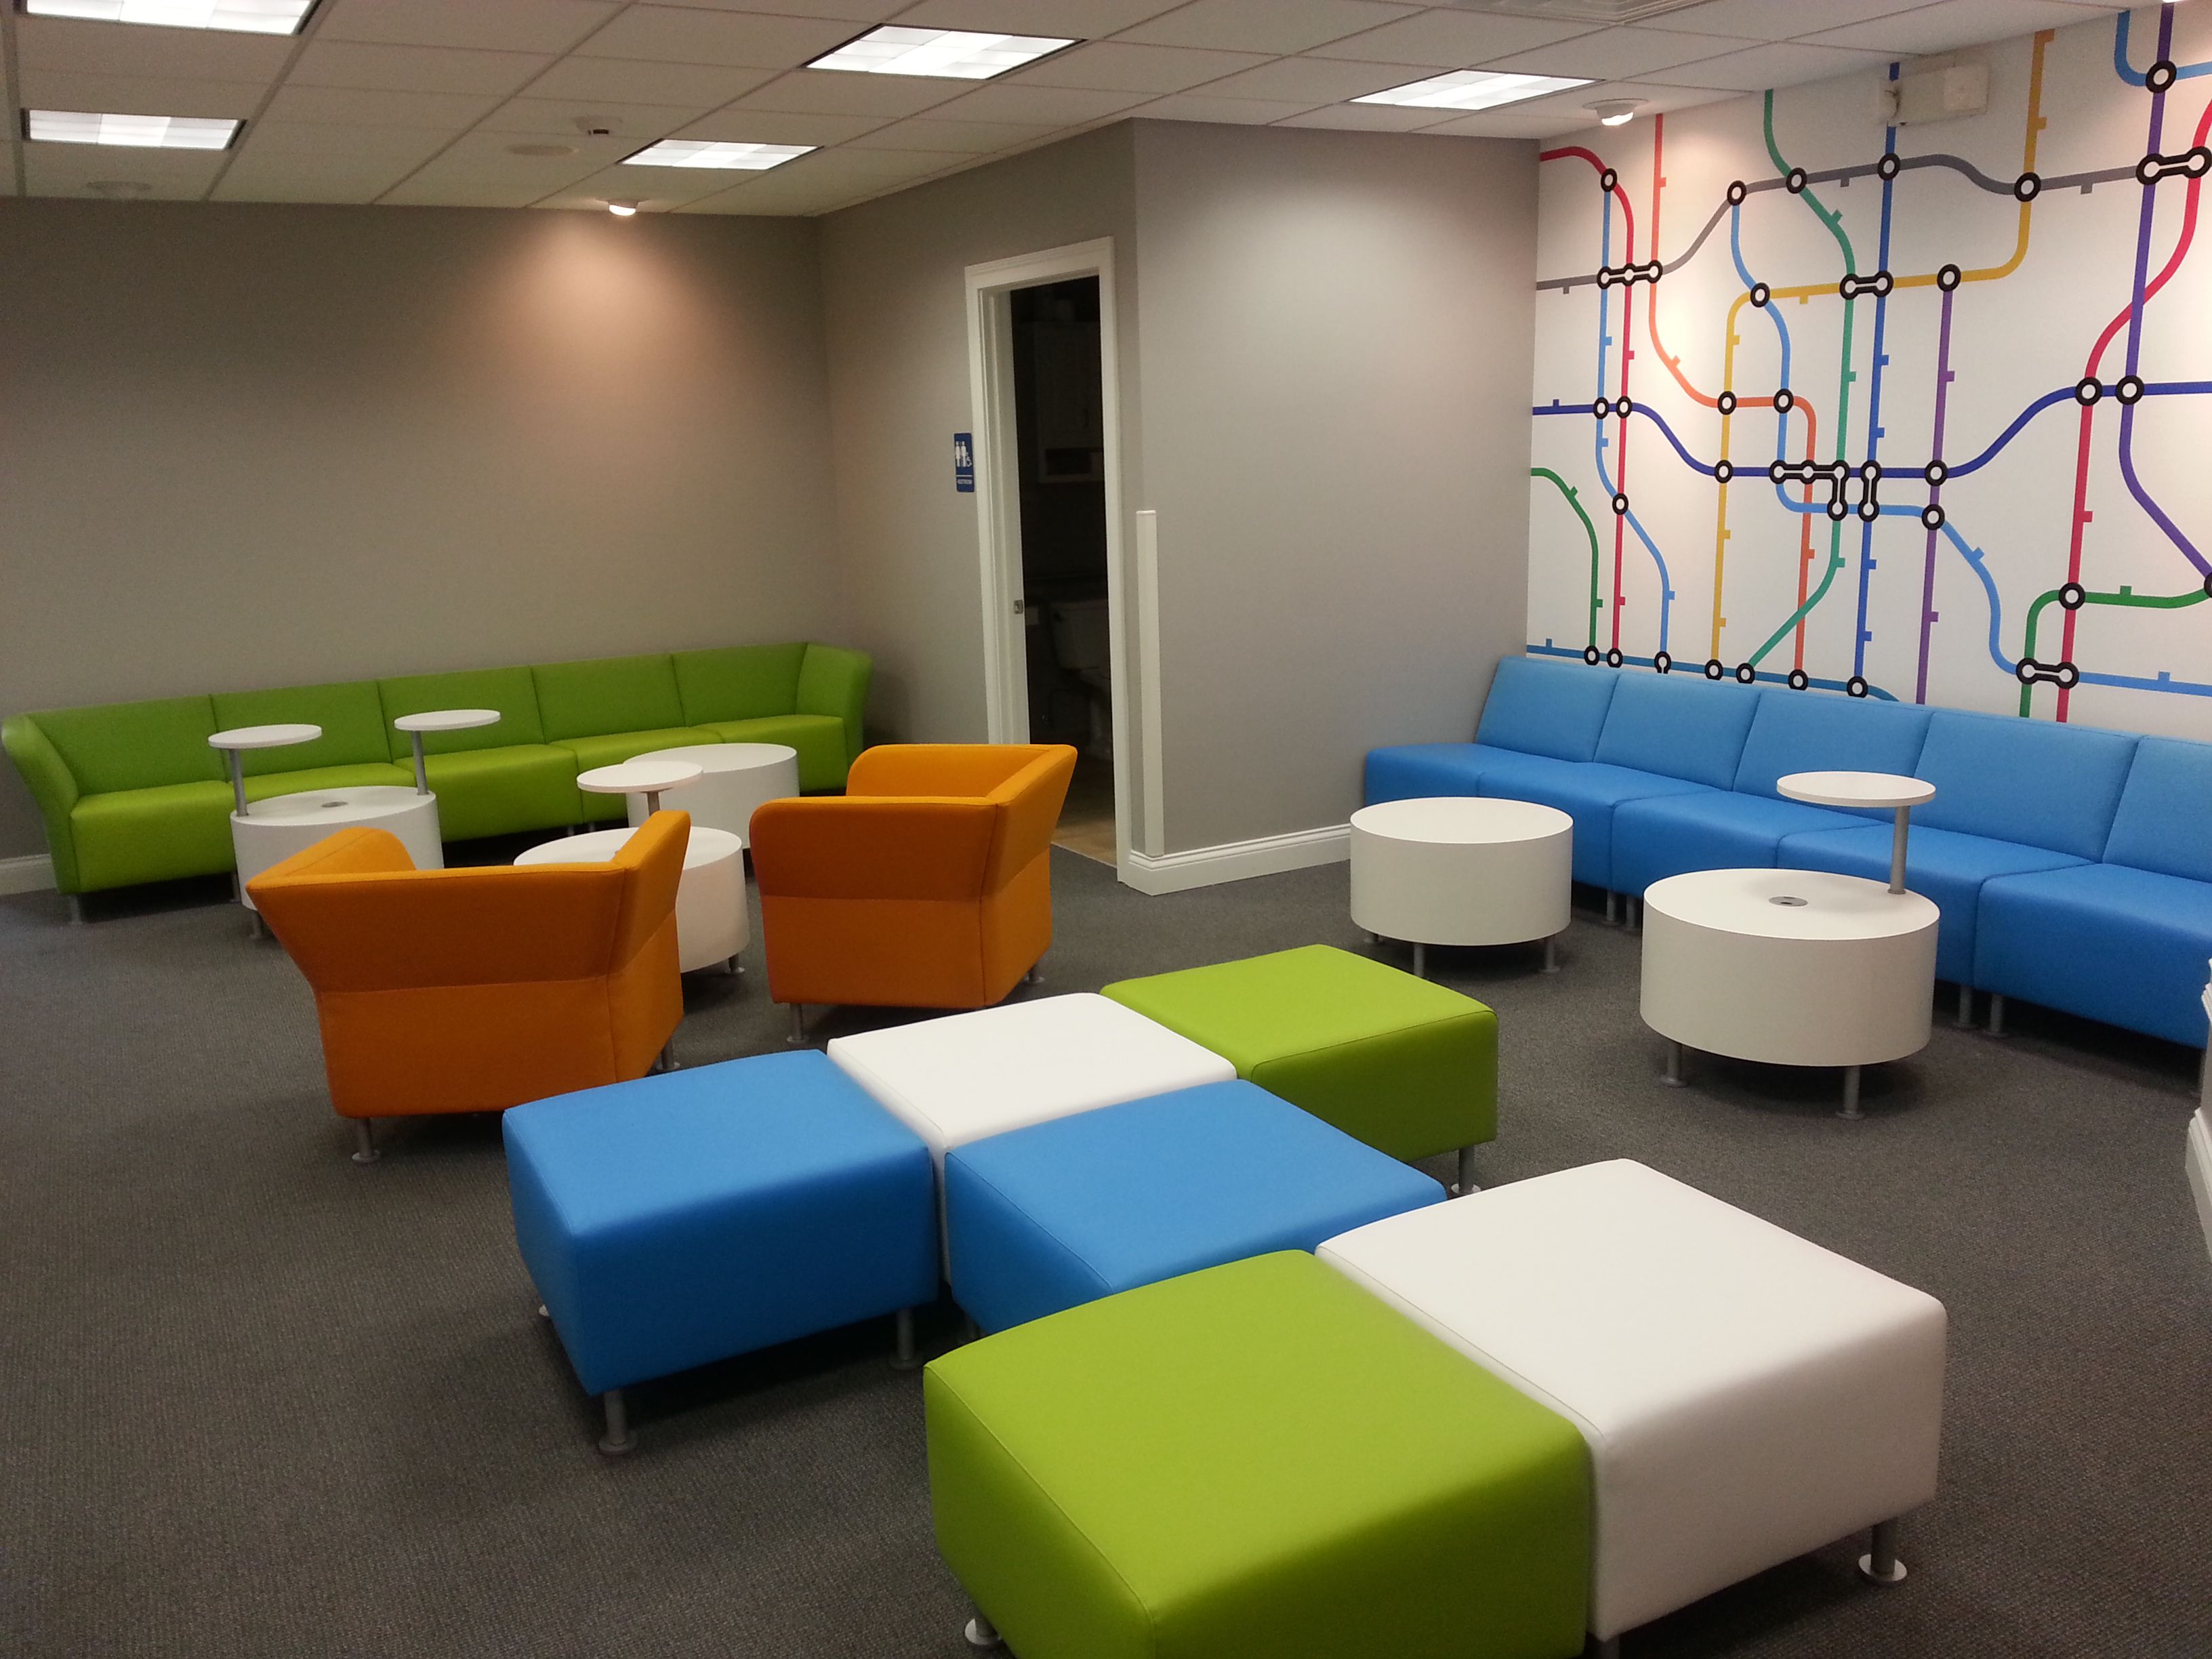 Waiting room furniture - Adult seating area, also kid friendly ...